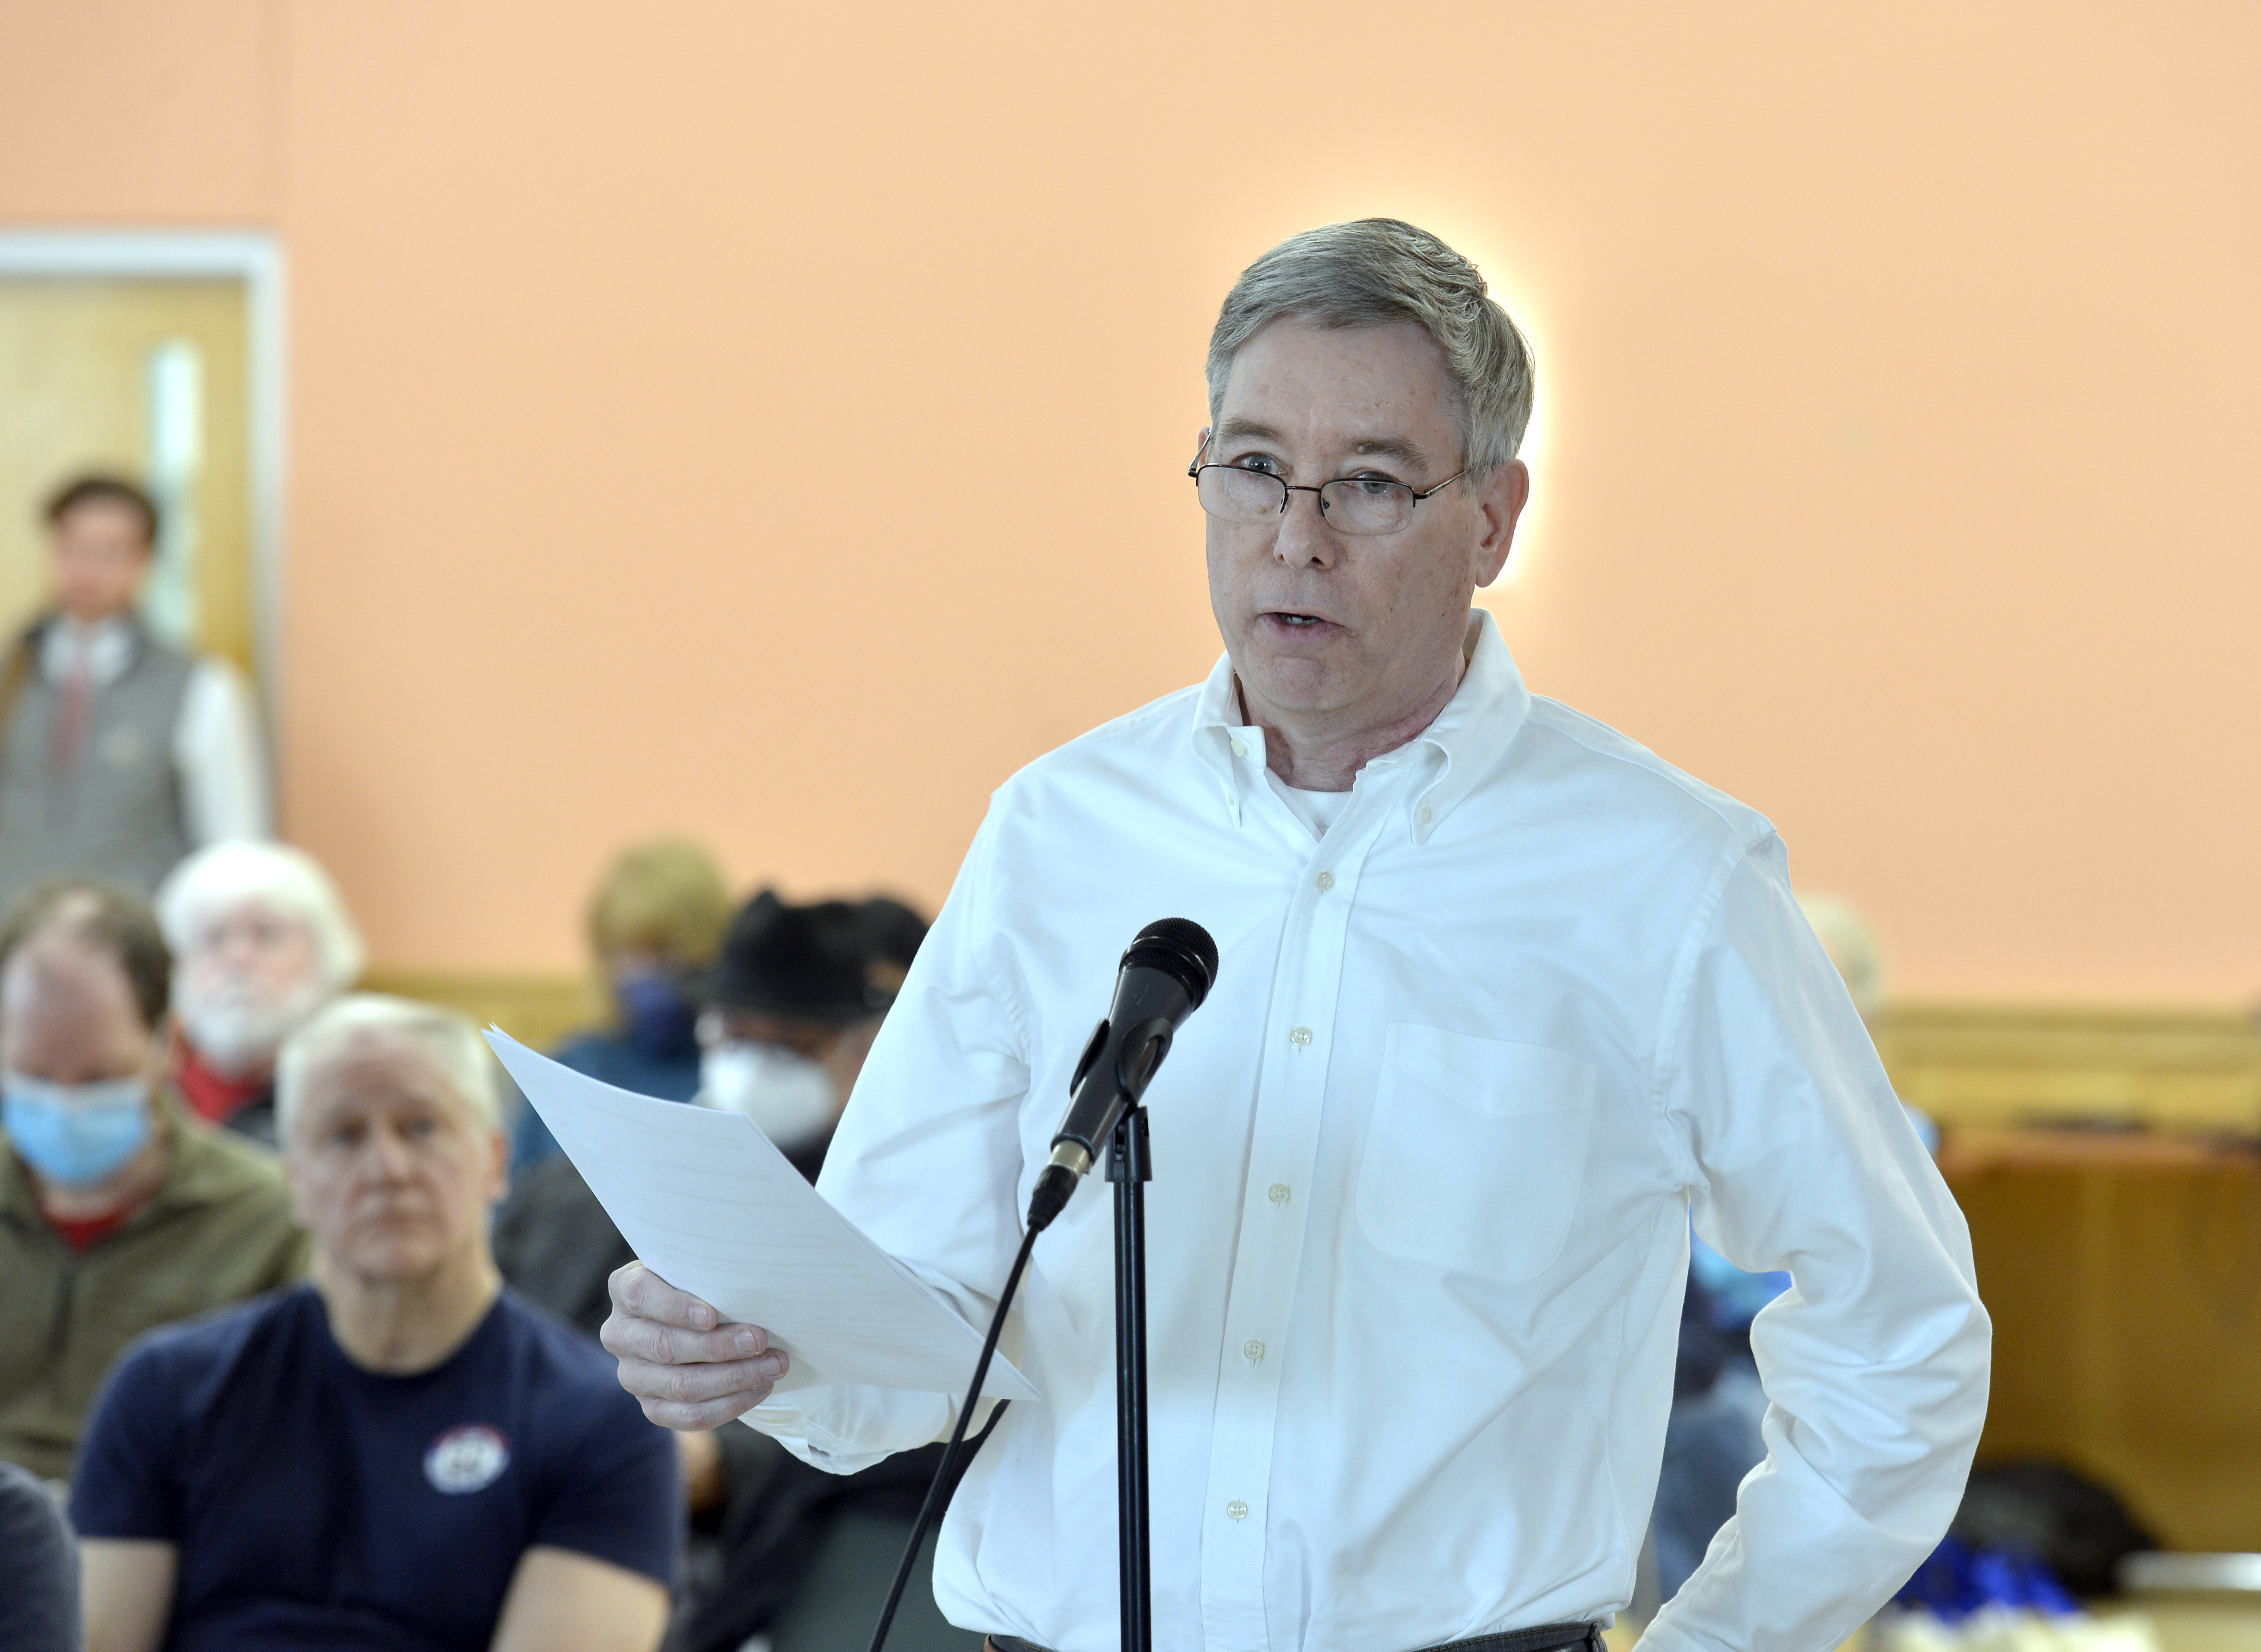 Ben Heckscher, co-founder of "Trains in the Valley", speaks during a meeting of the Western Massachusetts Passenger Rail Commission at the Northampton Senior Center.  (Don Treeger / The Republican)  3/21/2023